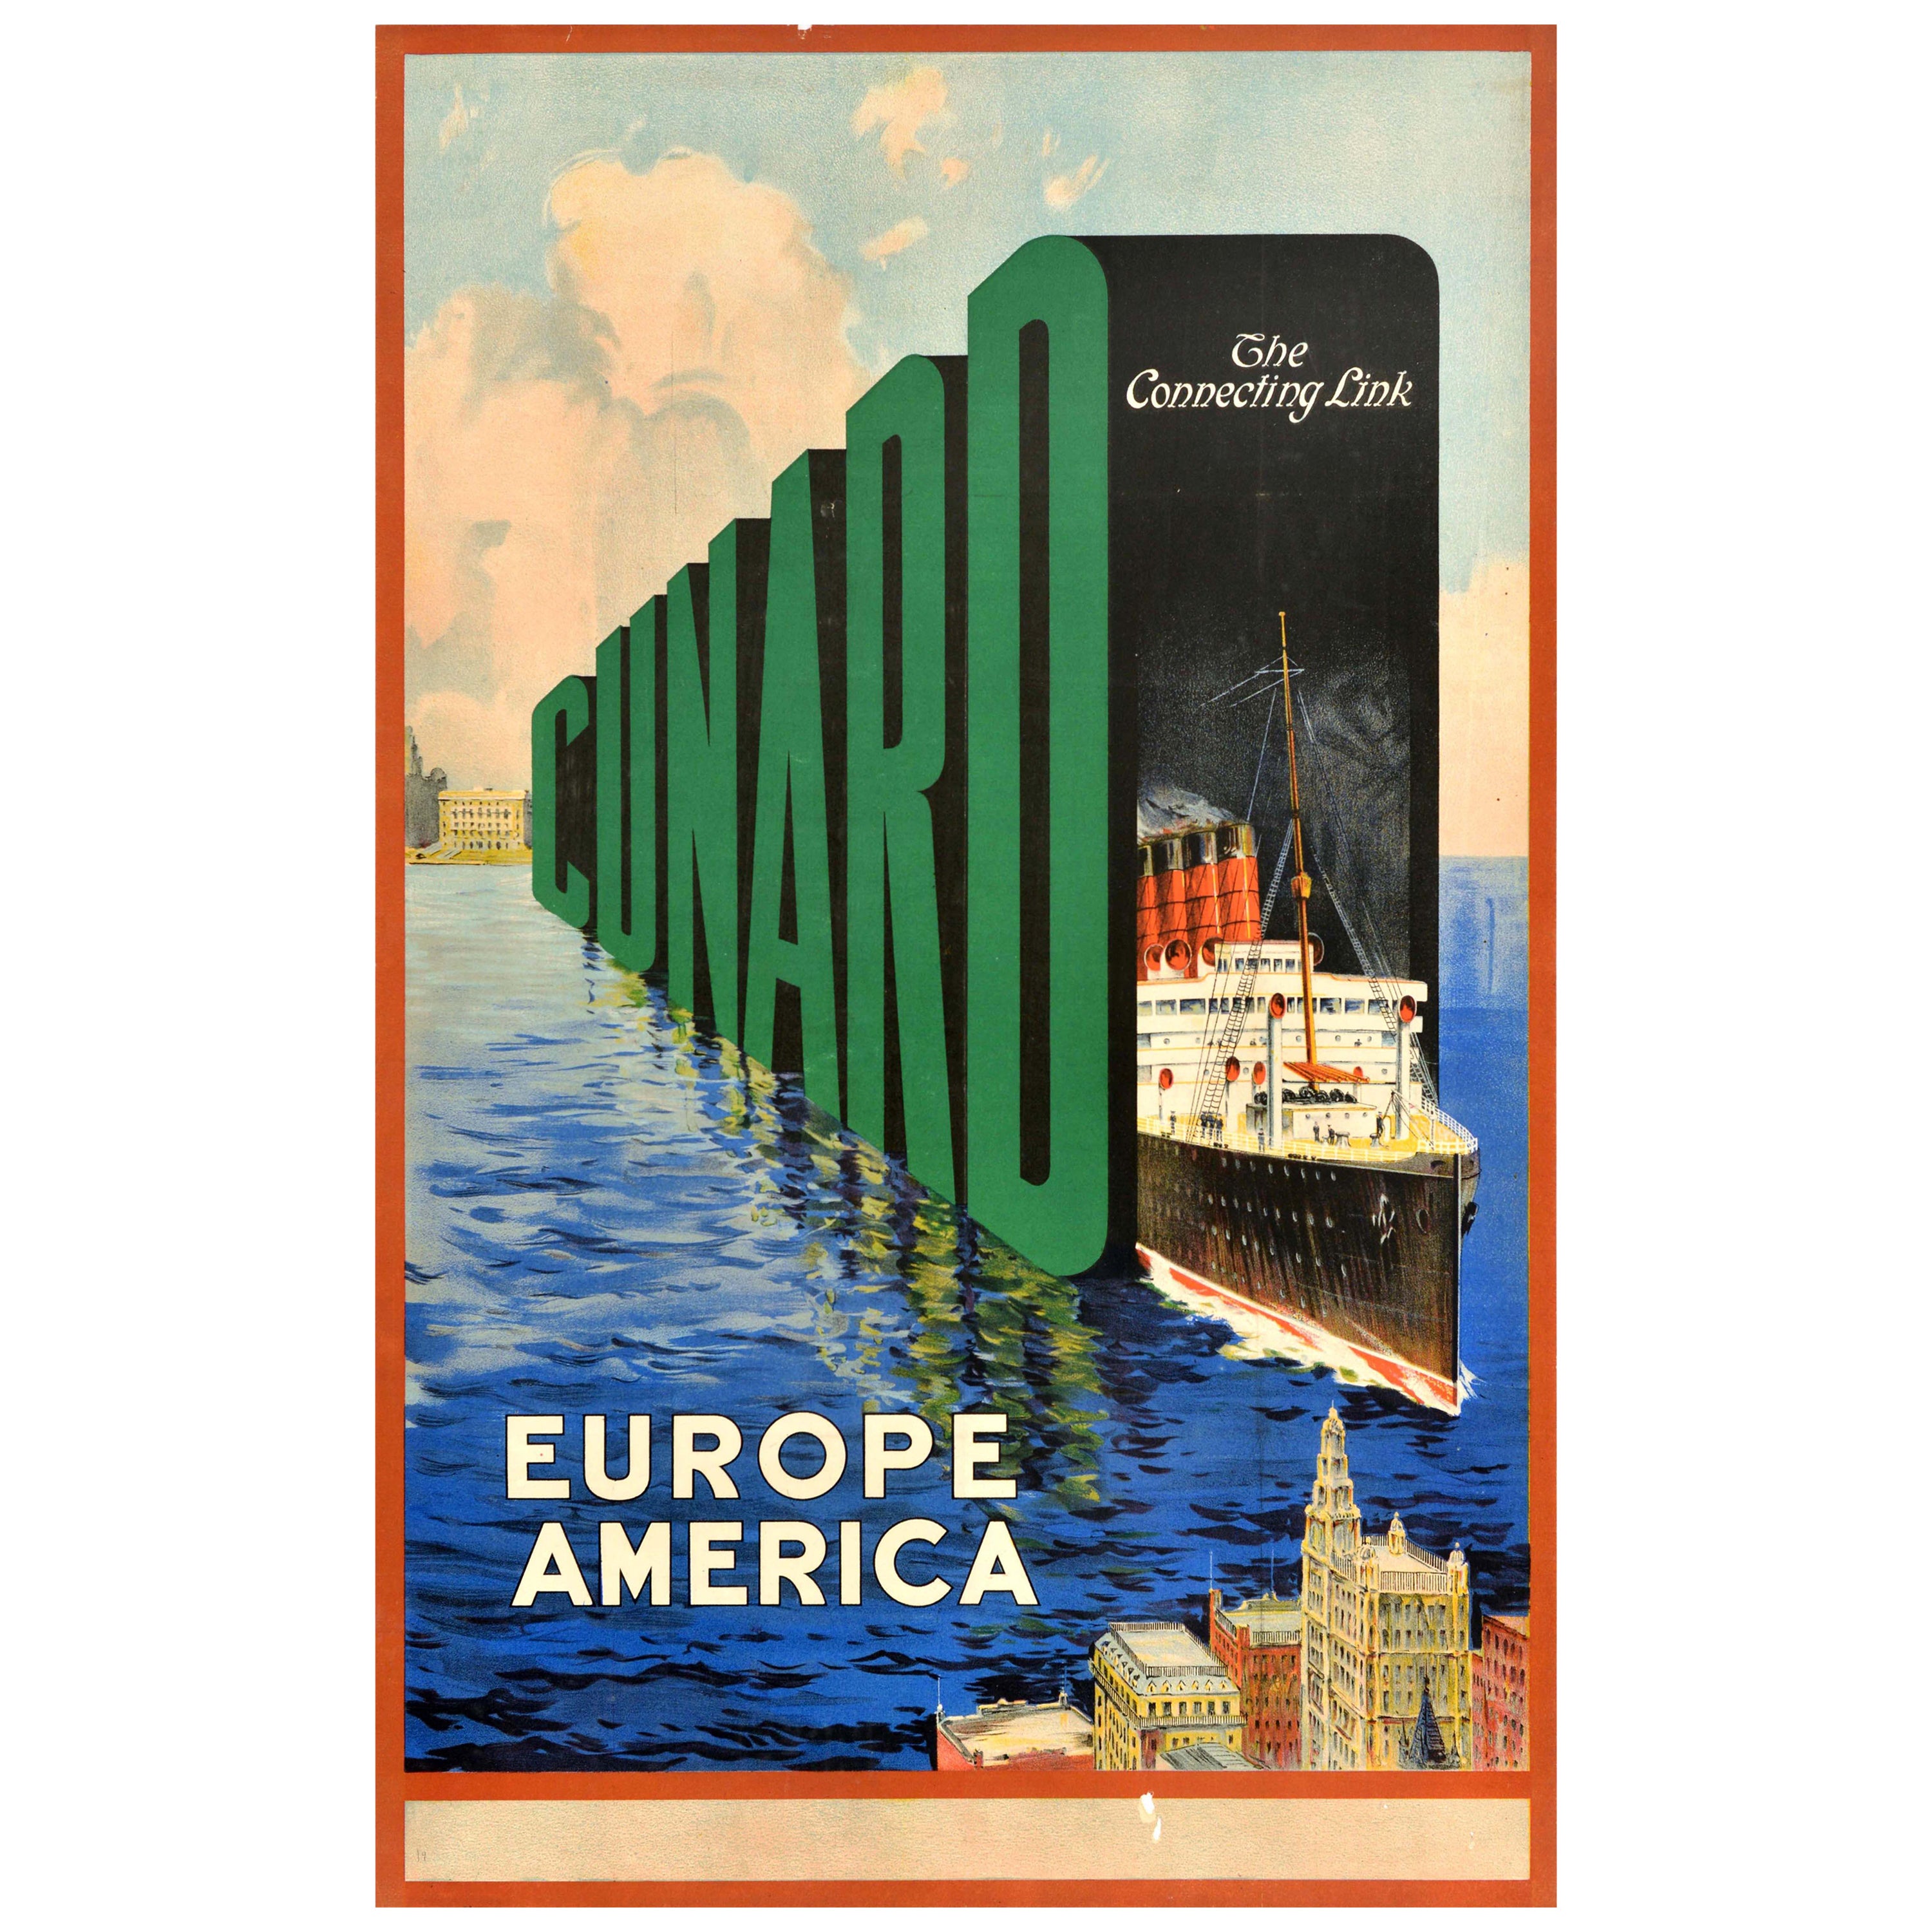 Original Vintage Cruise Travel Poster Cunard The Connecting Link Europe America For Sale